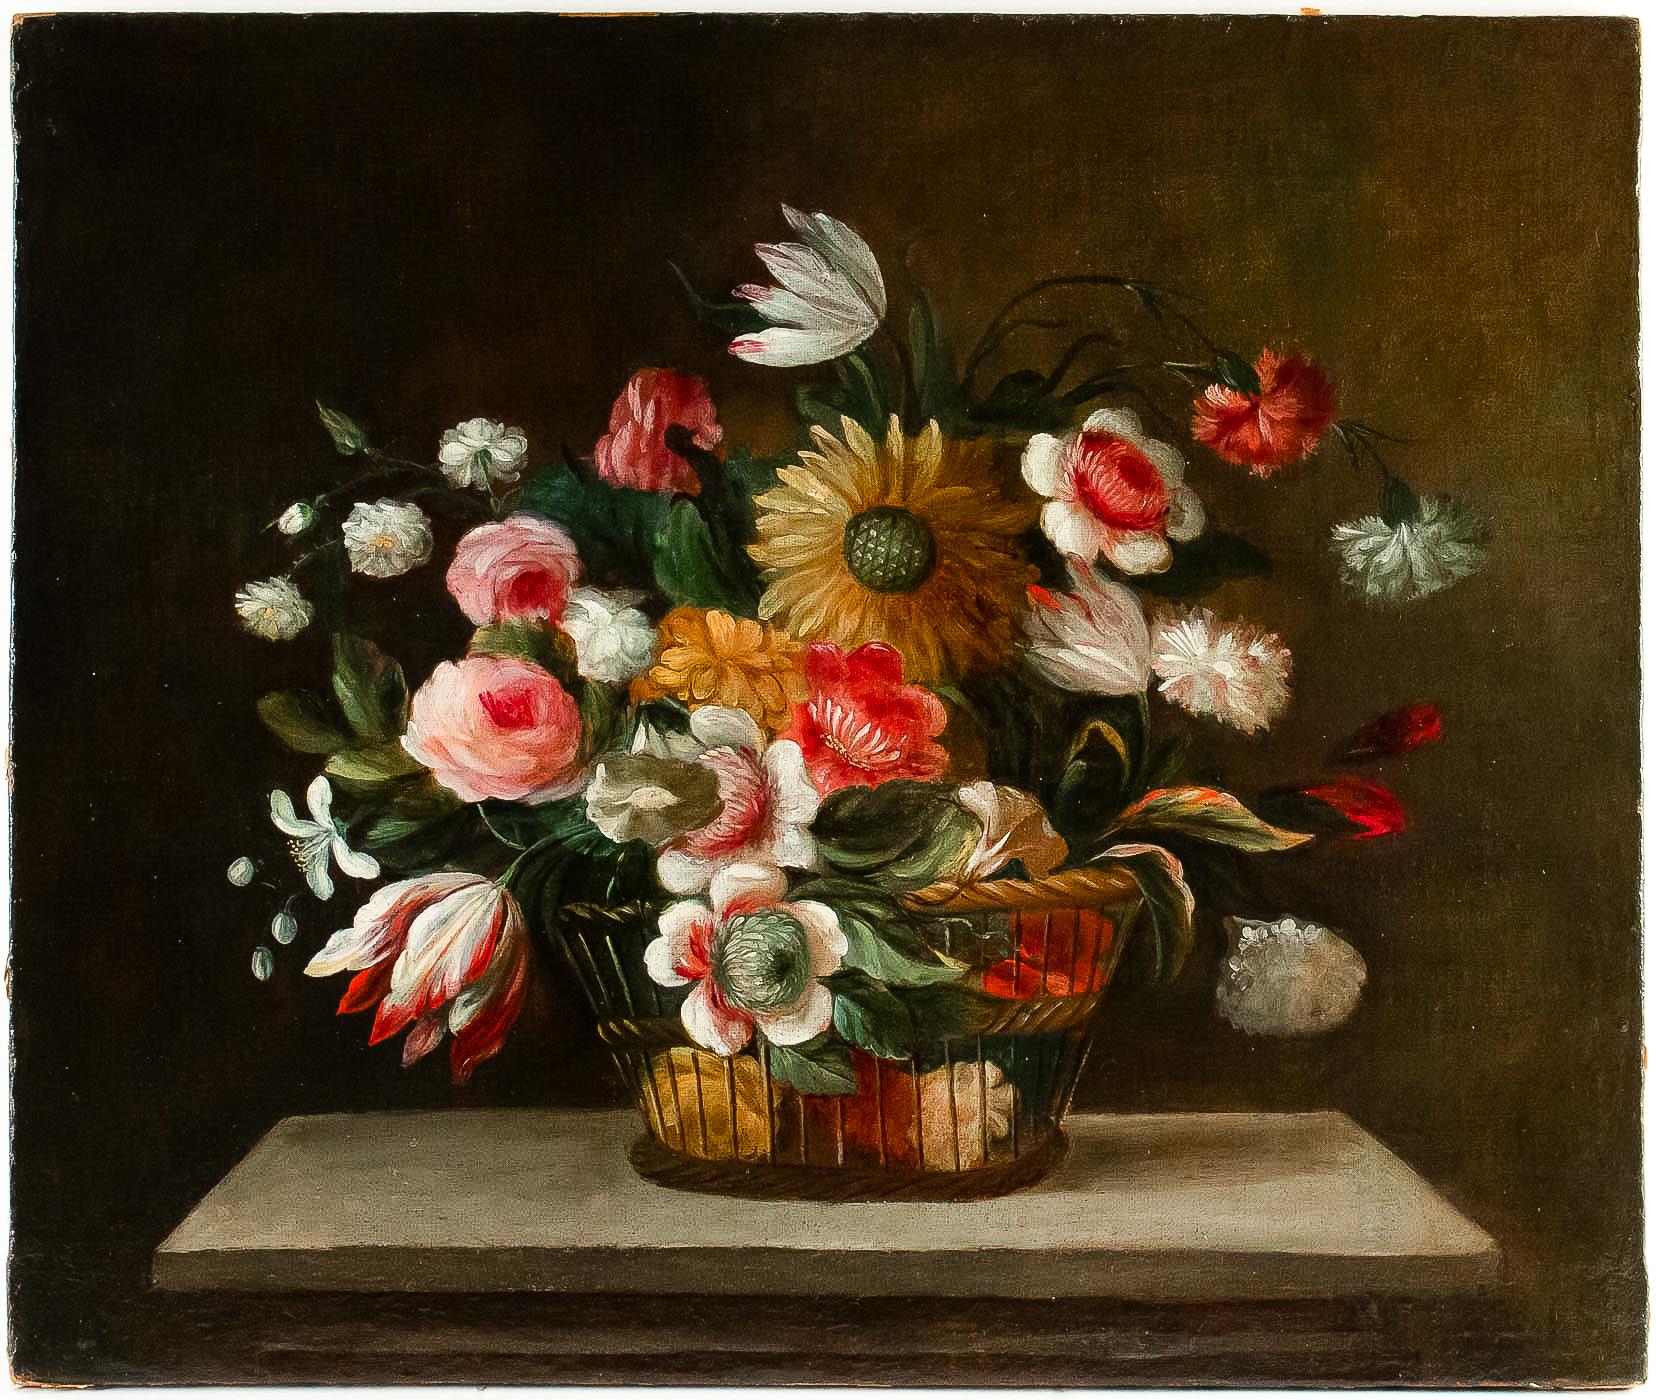 18th century French School, oil on canvas bouquets of flowers with sunflower

Much quality on this gorgeous and decorative oil on canvas, depicting a flower bouquets with a sunflower on the center resting on marble-ledge.

Late 18th century or